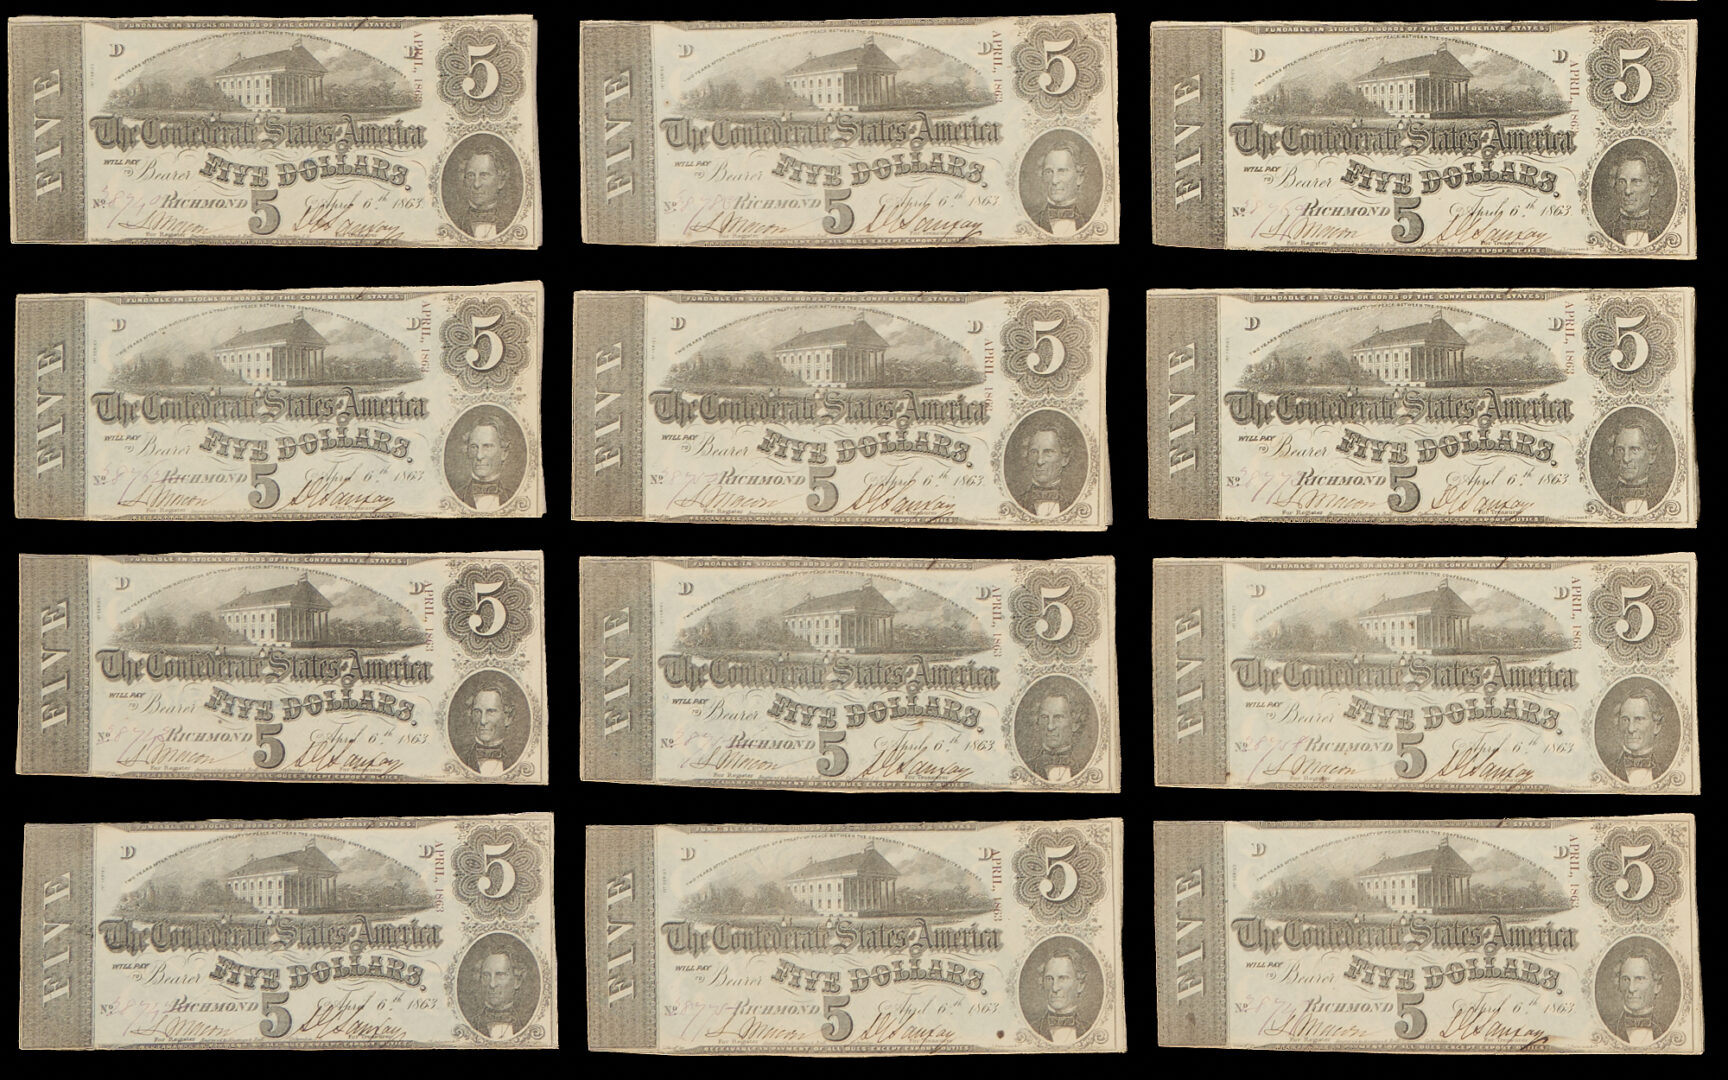 Lot 591: Group of 45 $5 1863 Confederate States Obsolete Currency Notes